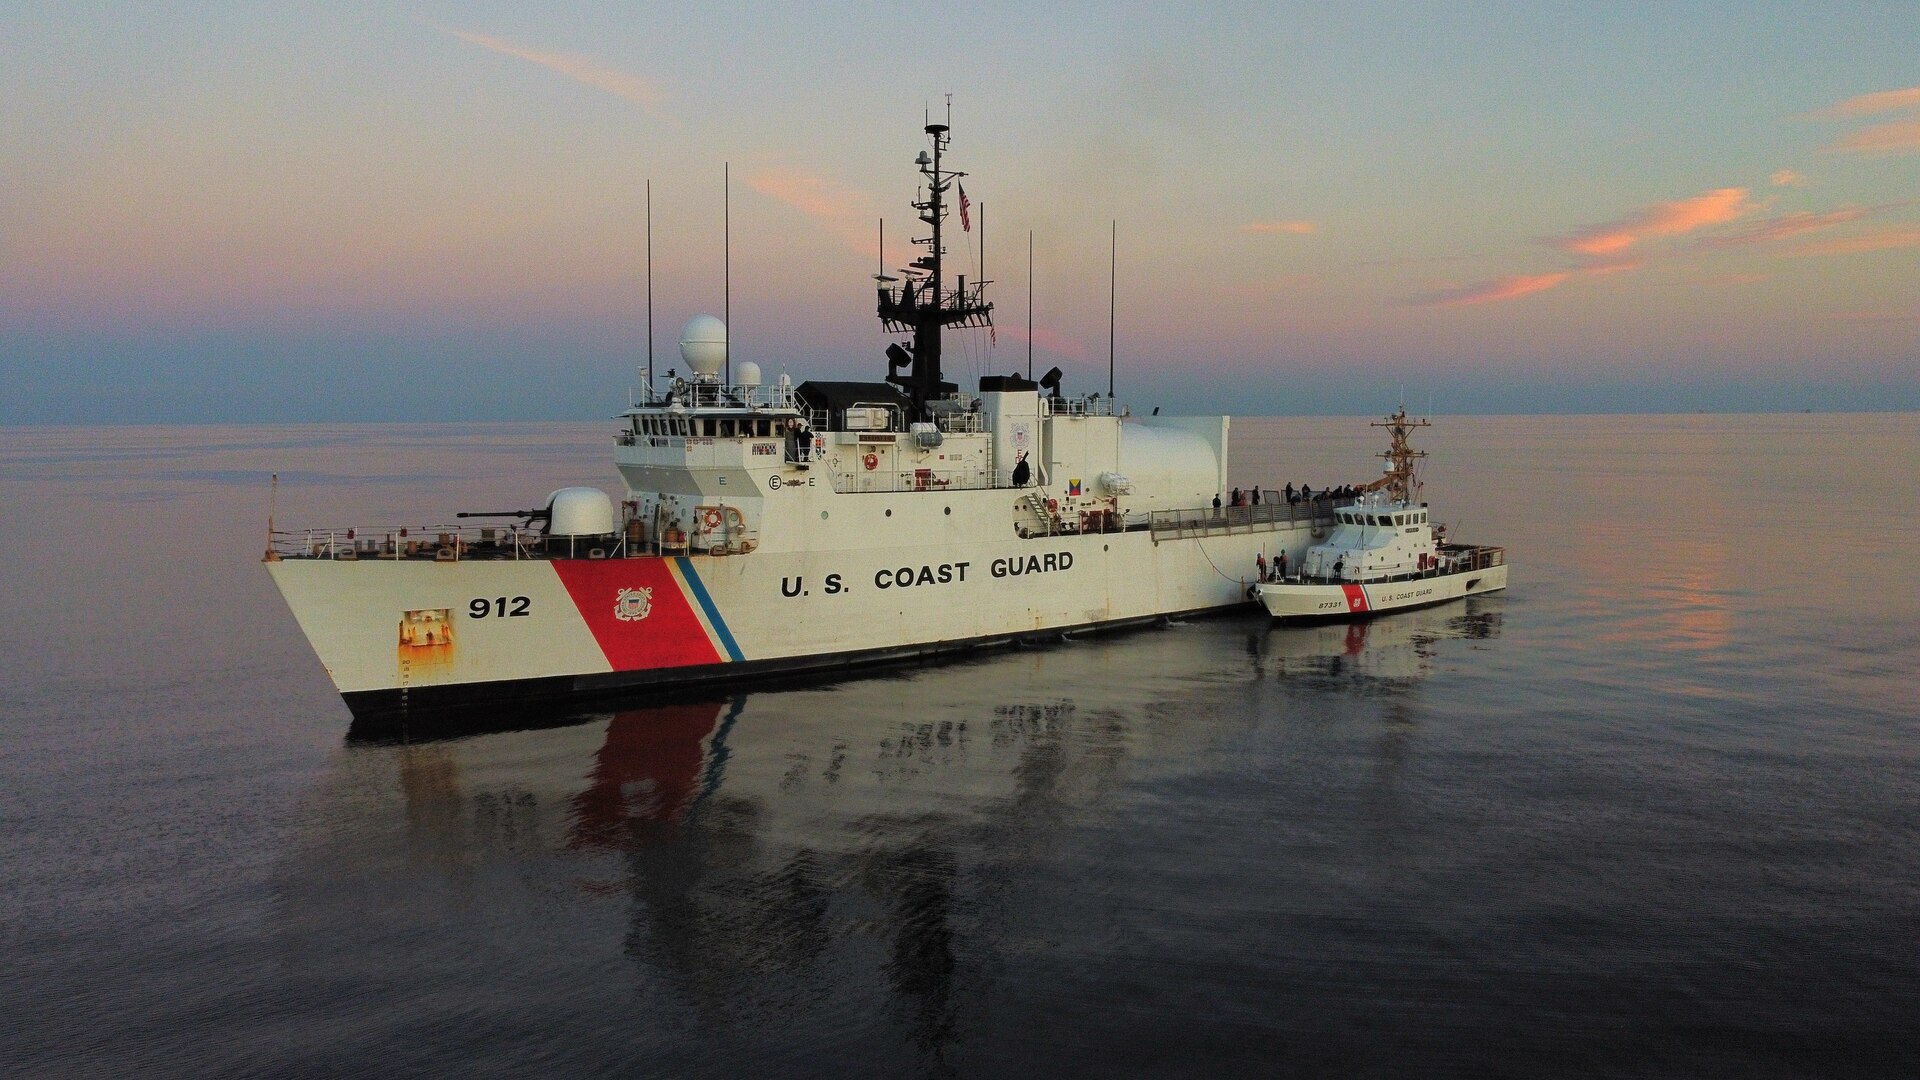 The crews of U.S. Coast Guard Cutter Legare and Coast Guard Cutter Moray conduct a supply replenishment near the mouth of the Mississippi River, Nov. 19, 2023. Legare was patrolling the Gulf of Mexico in response to an oil discharge approximately 20 miles northeast of the mouth of the Mississippi River.